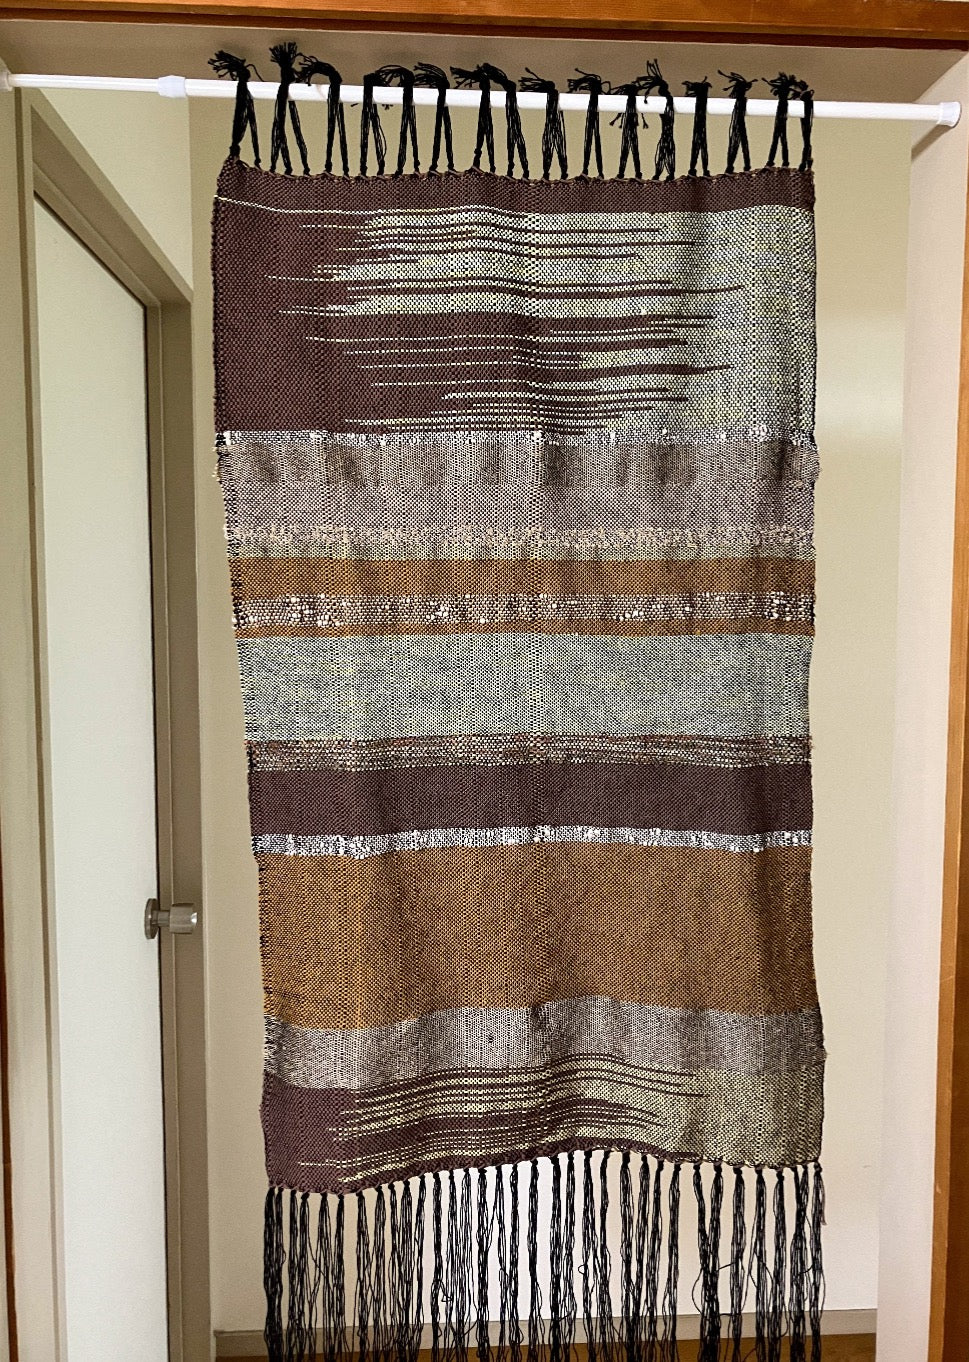 Brown and tan lines and zigzags panel curtain with black fringes hangs in interior doorway